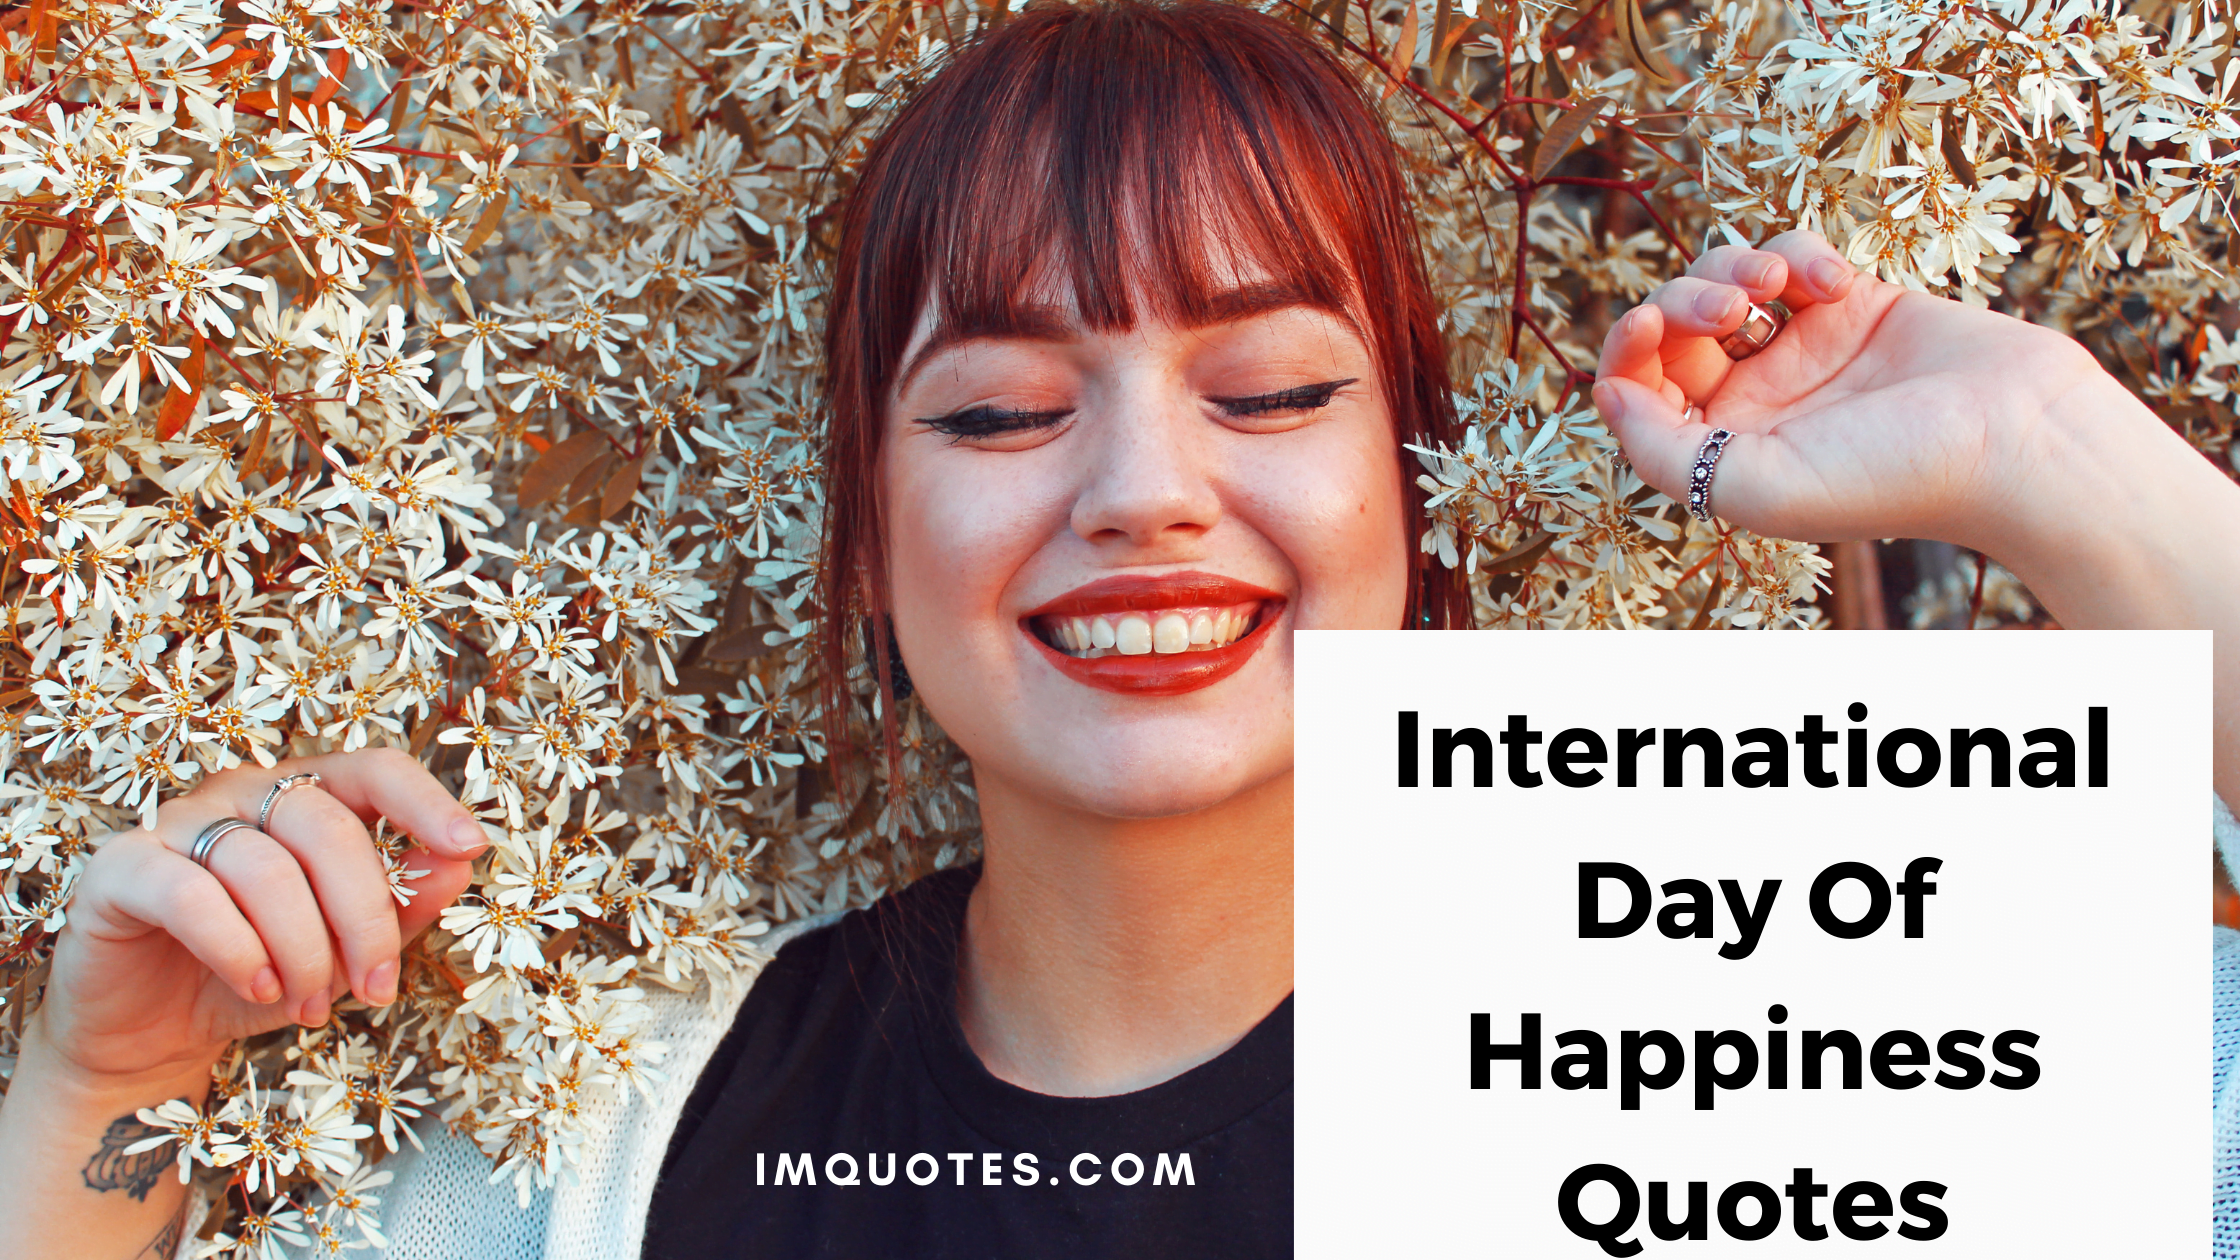 International Day Of Happiness Quotes1